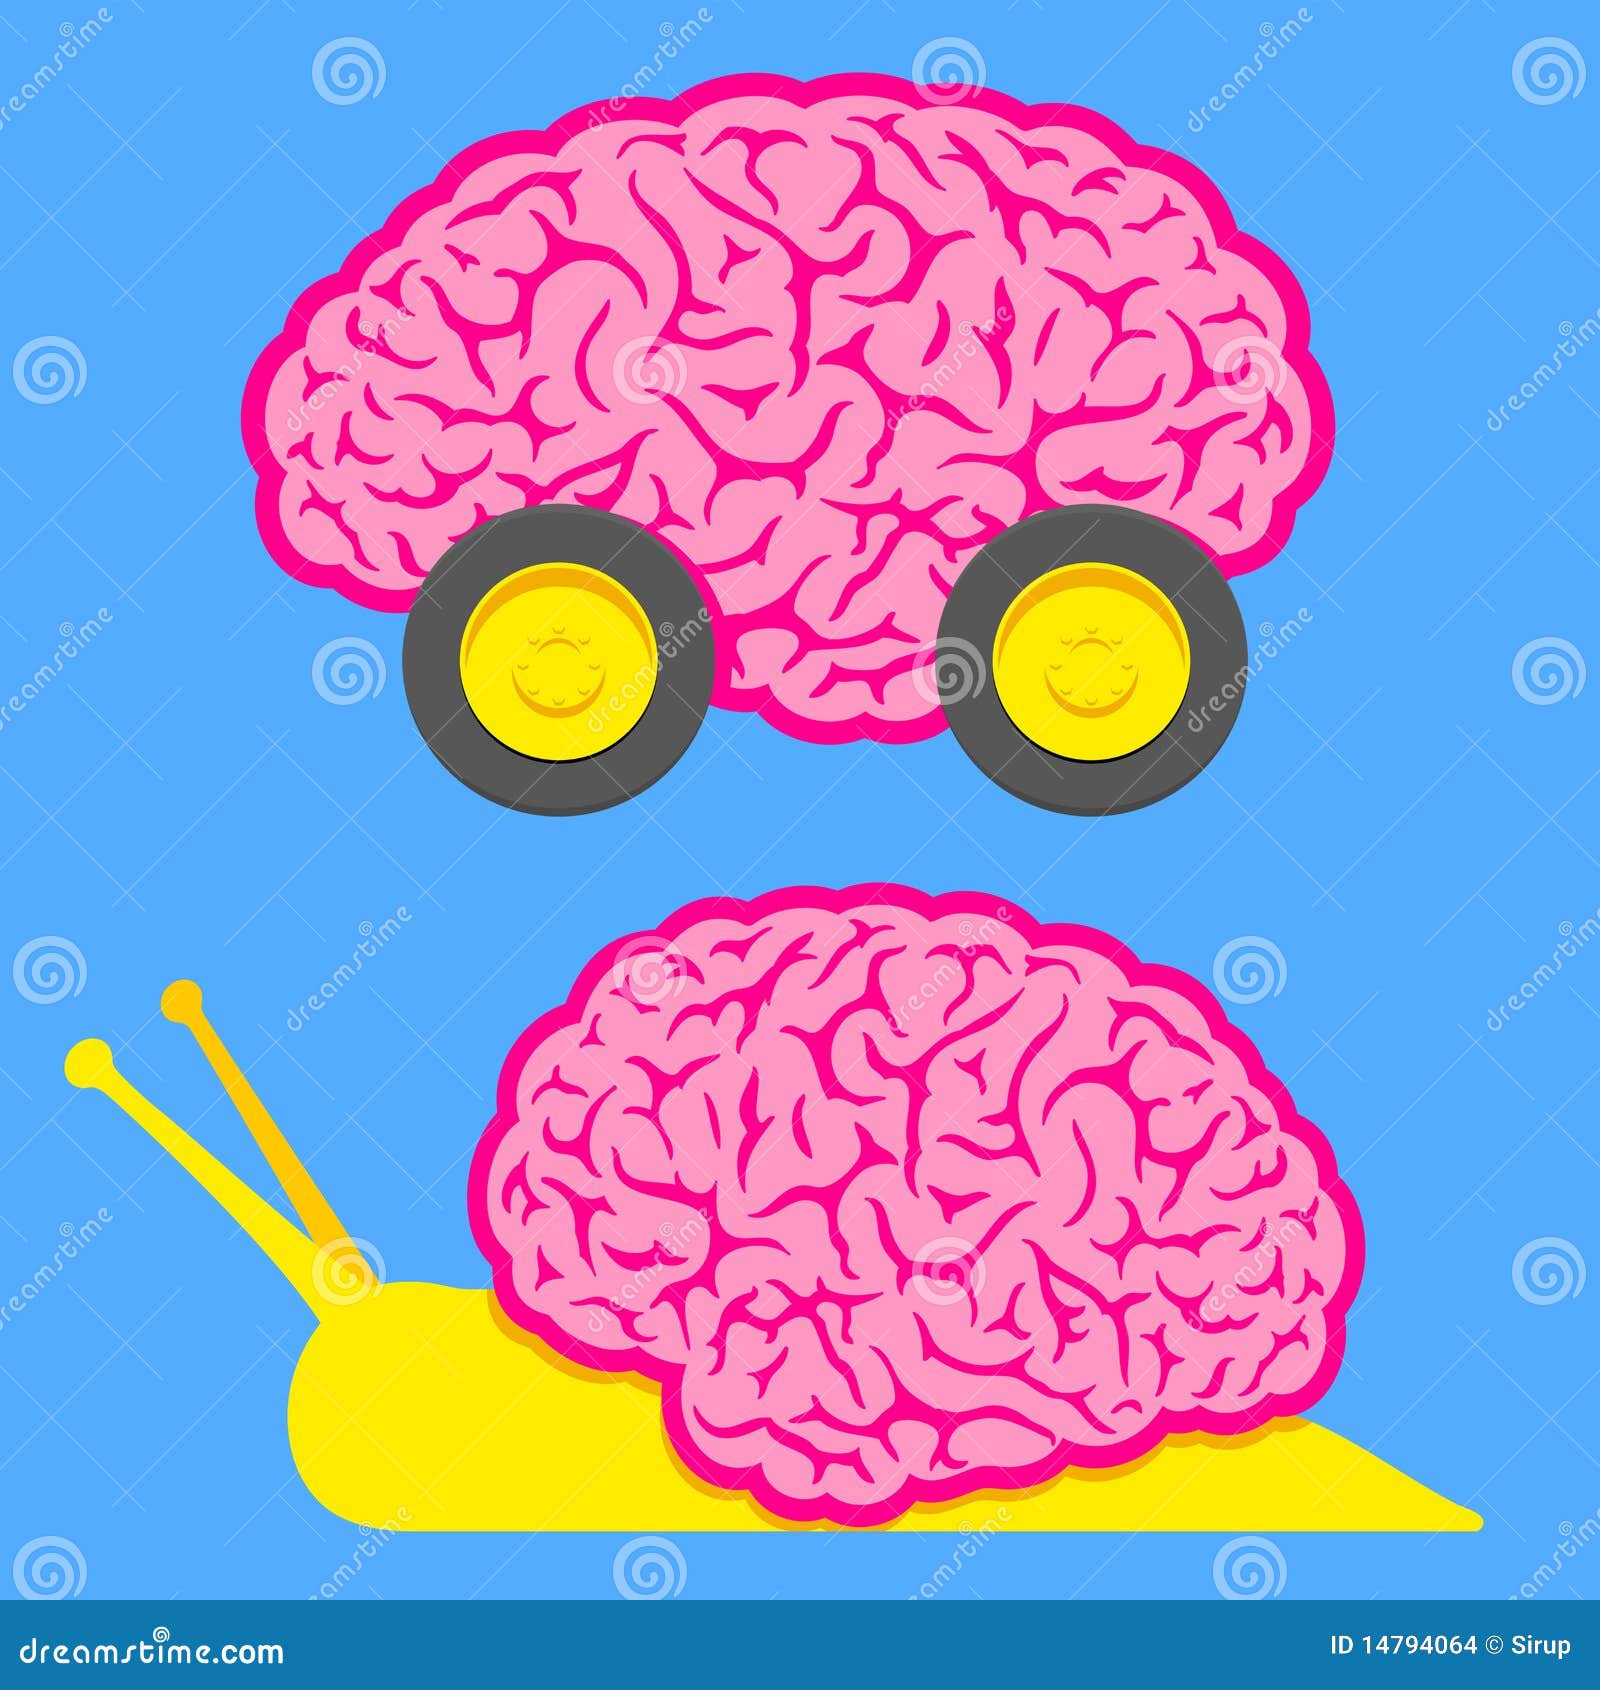 Download Fast Brain On Wheels And Slow Snail Brain Stock Vector ...